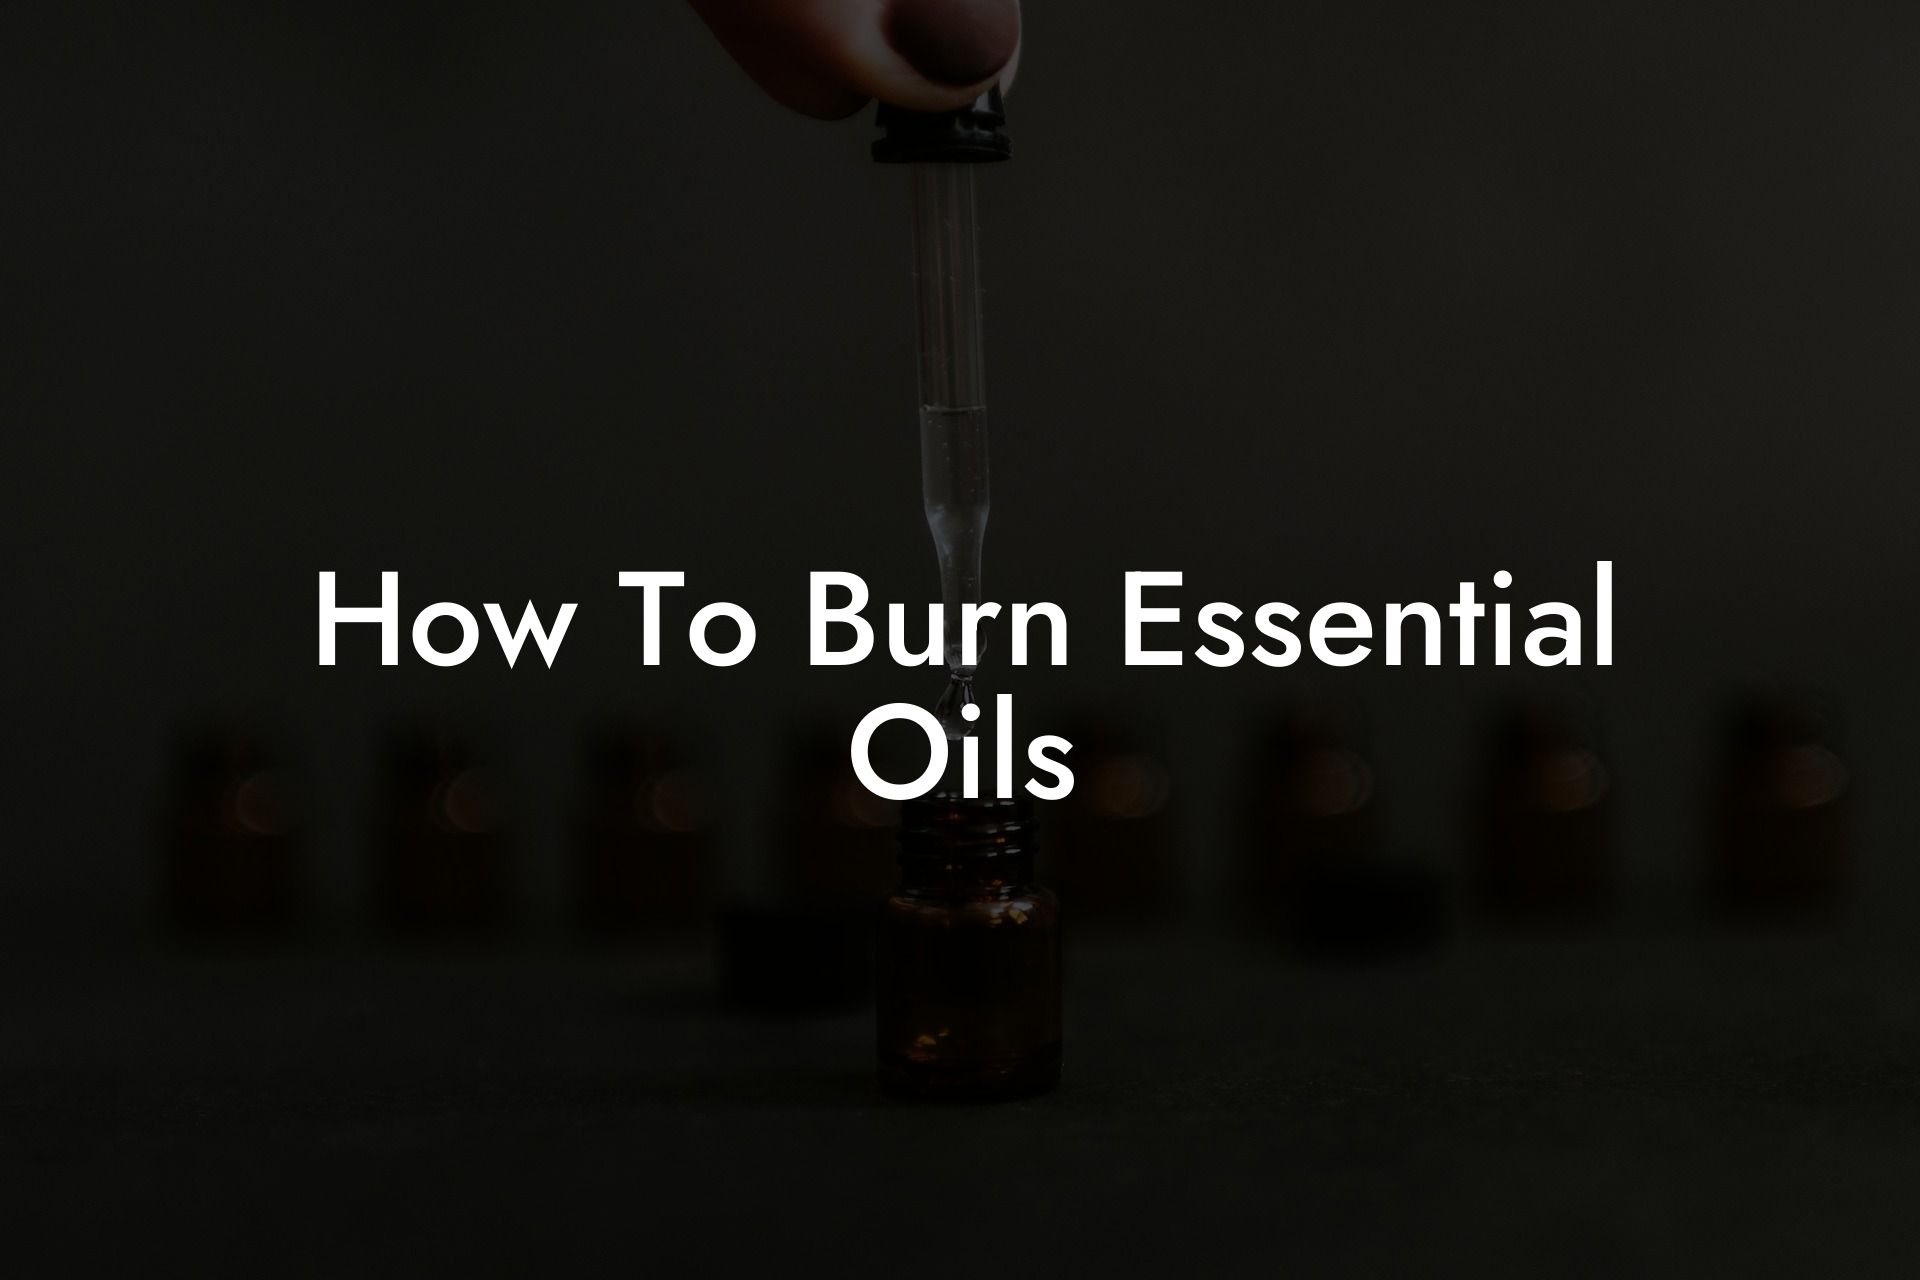 How To Burn Essential Oils